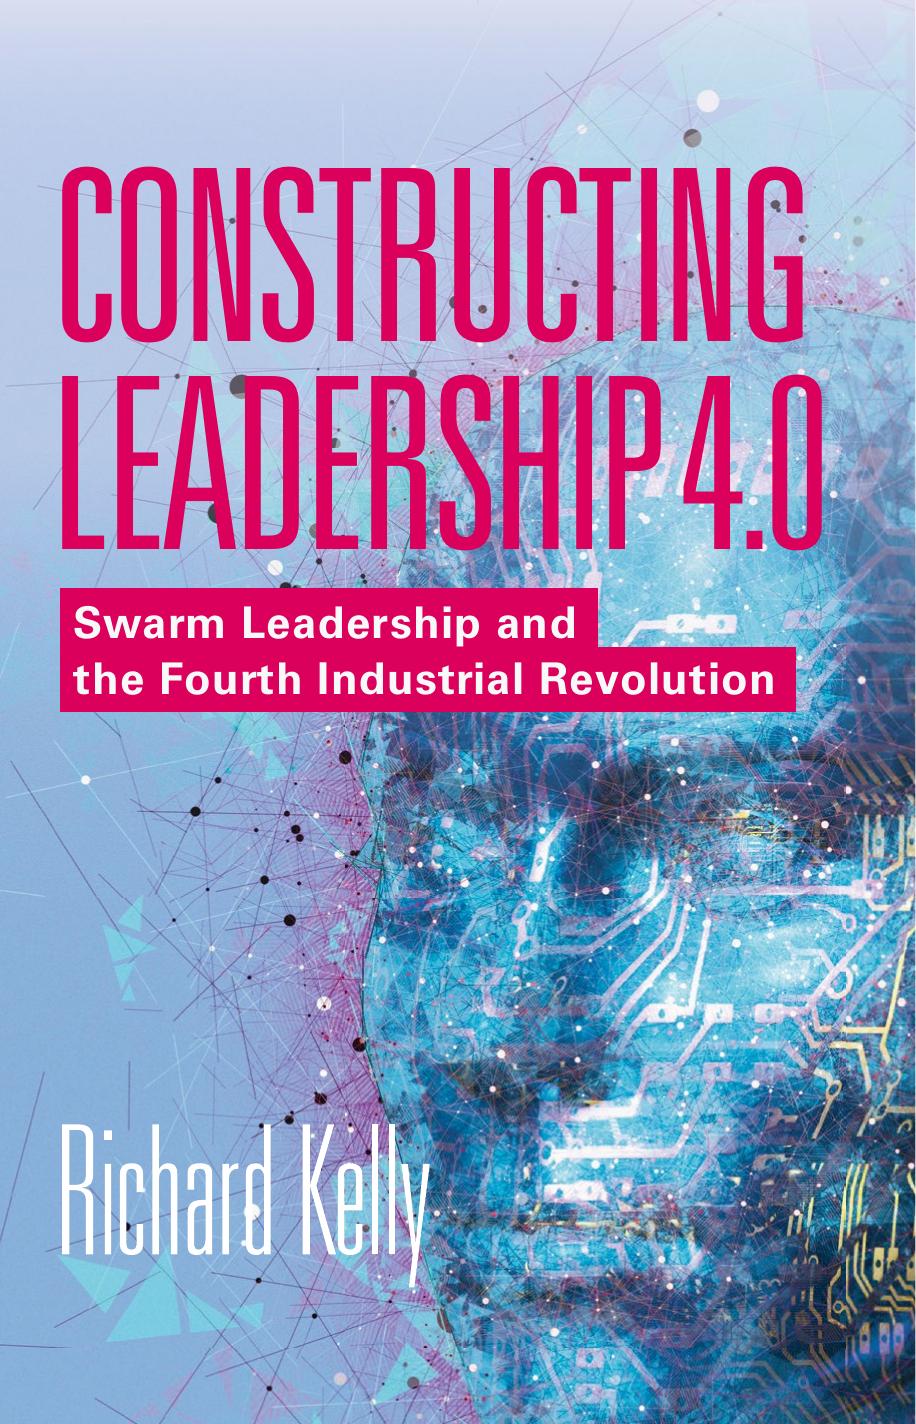 Constructing Leadership 4.0  Swarm Leadership and the Fourth Industrial Revolution 2019